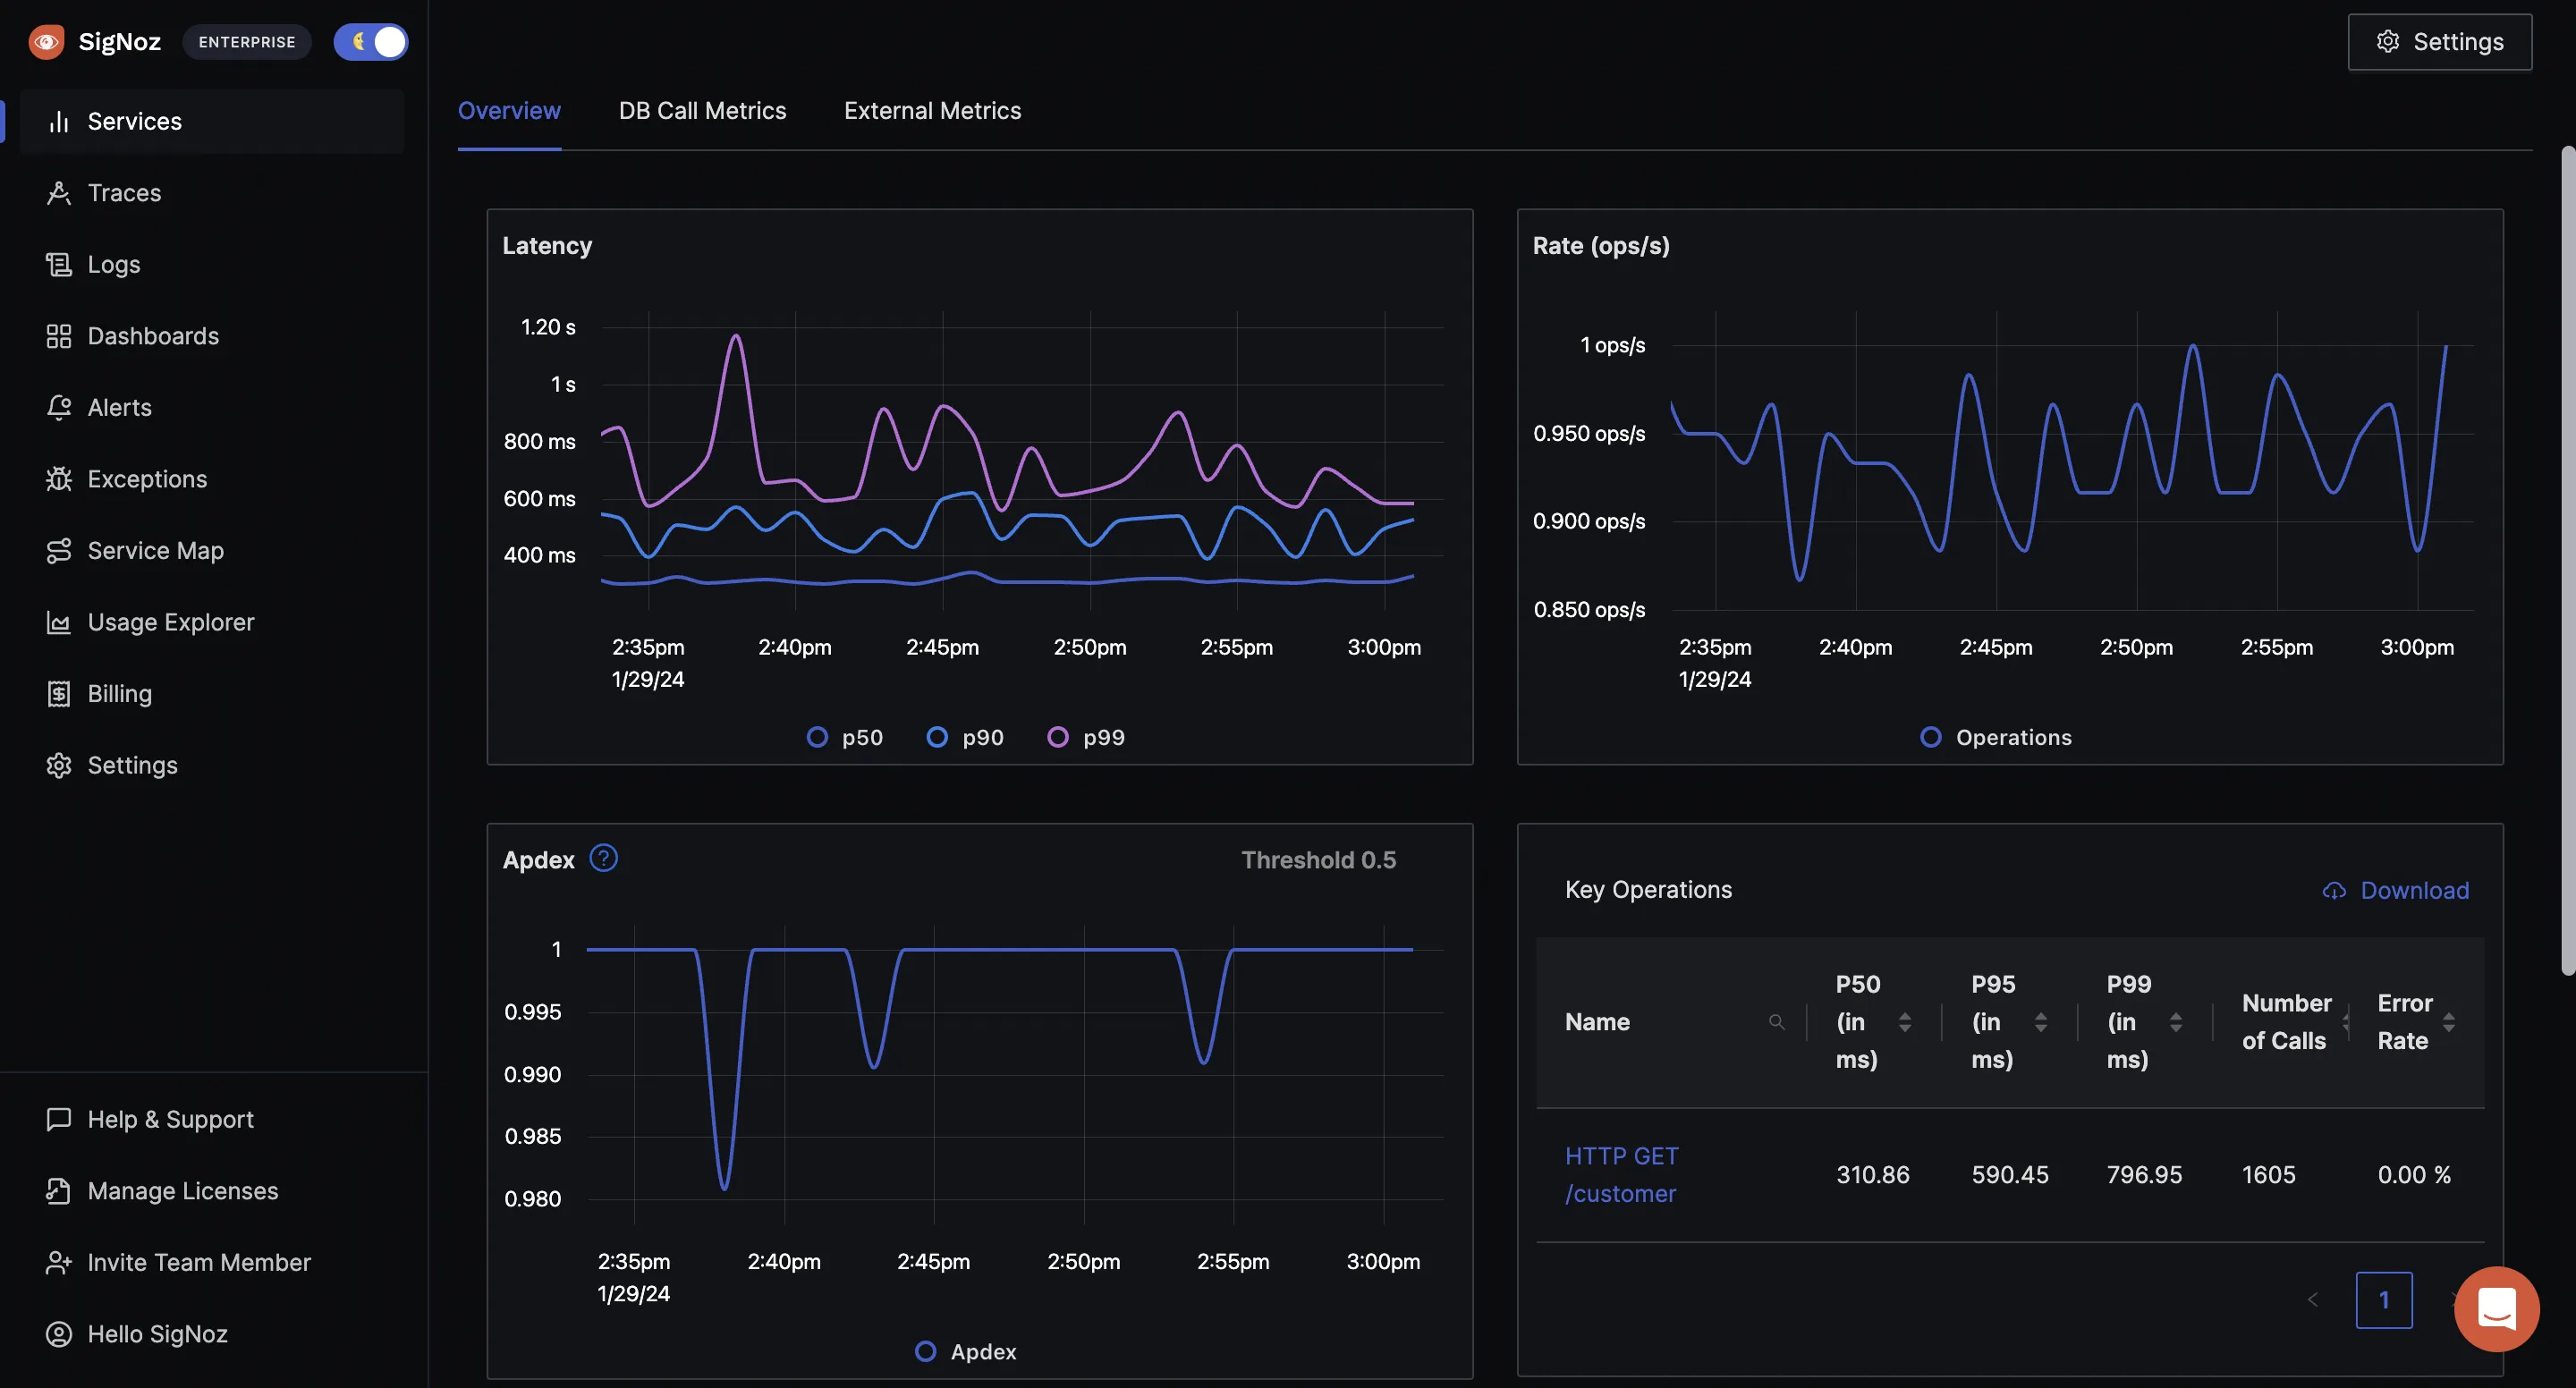 SigNoz dashboard showing the popular RED metrics for application performance monitoring